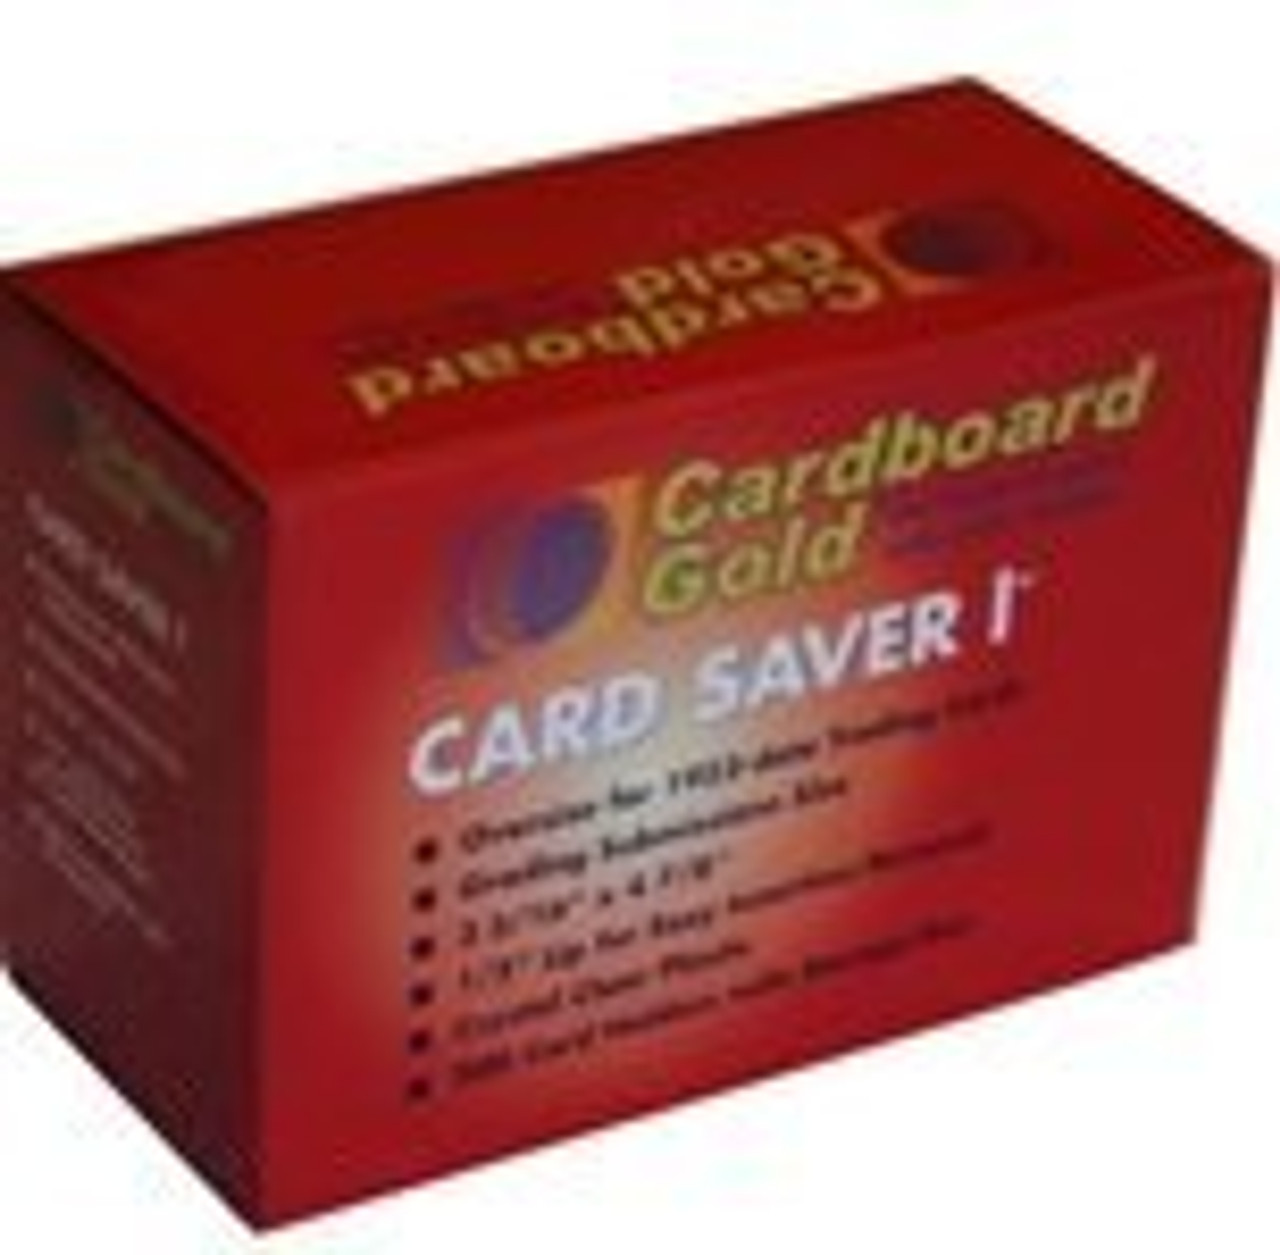 200ct Cardboard Gold Card Saver 1 - Semi Rigid Sleeves Protectors - PSA -  BGS - Graded Card Submissions - Columbia Hobby - Card Savers, Toploaders,  Sleeves and More